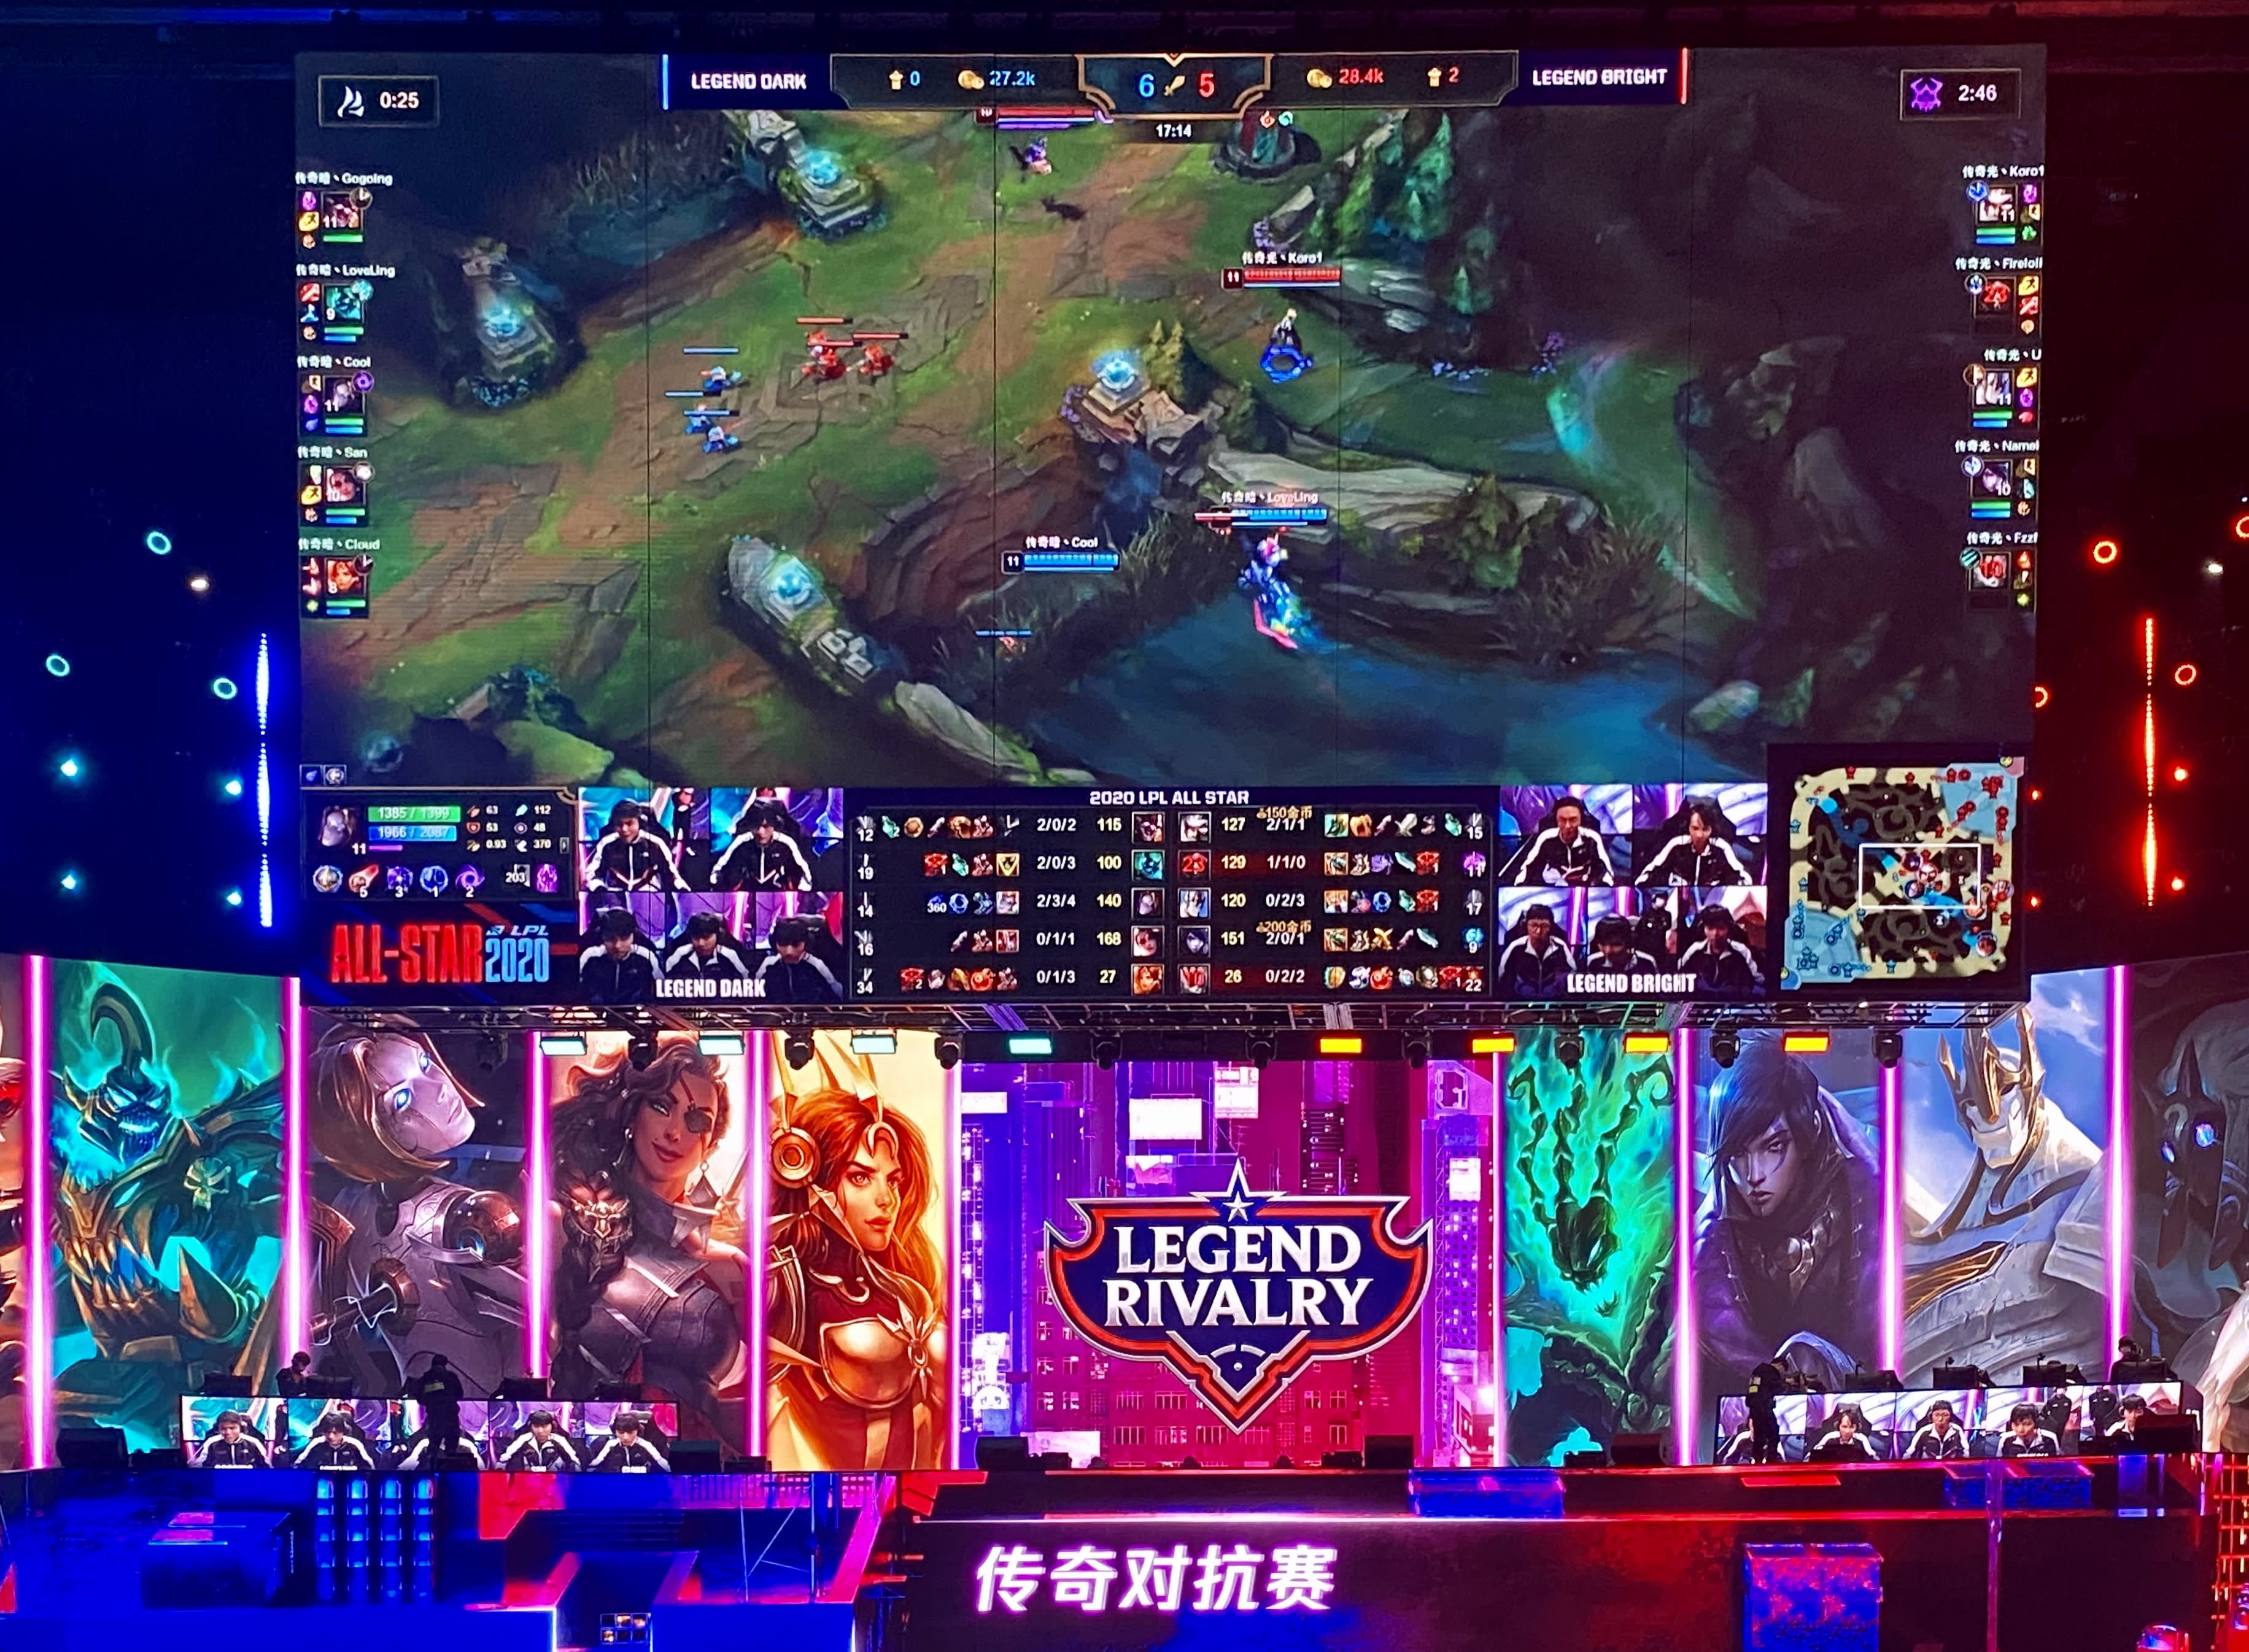 League of Legends maker Riot Games to double down in China as gaming growth continues